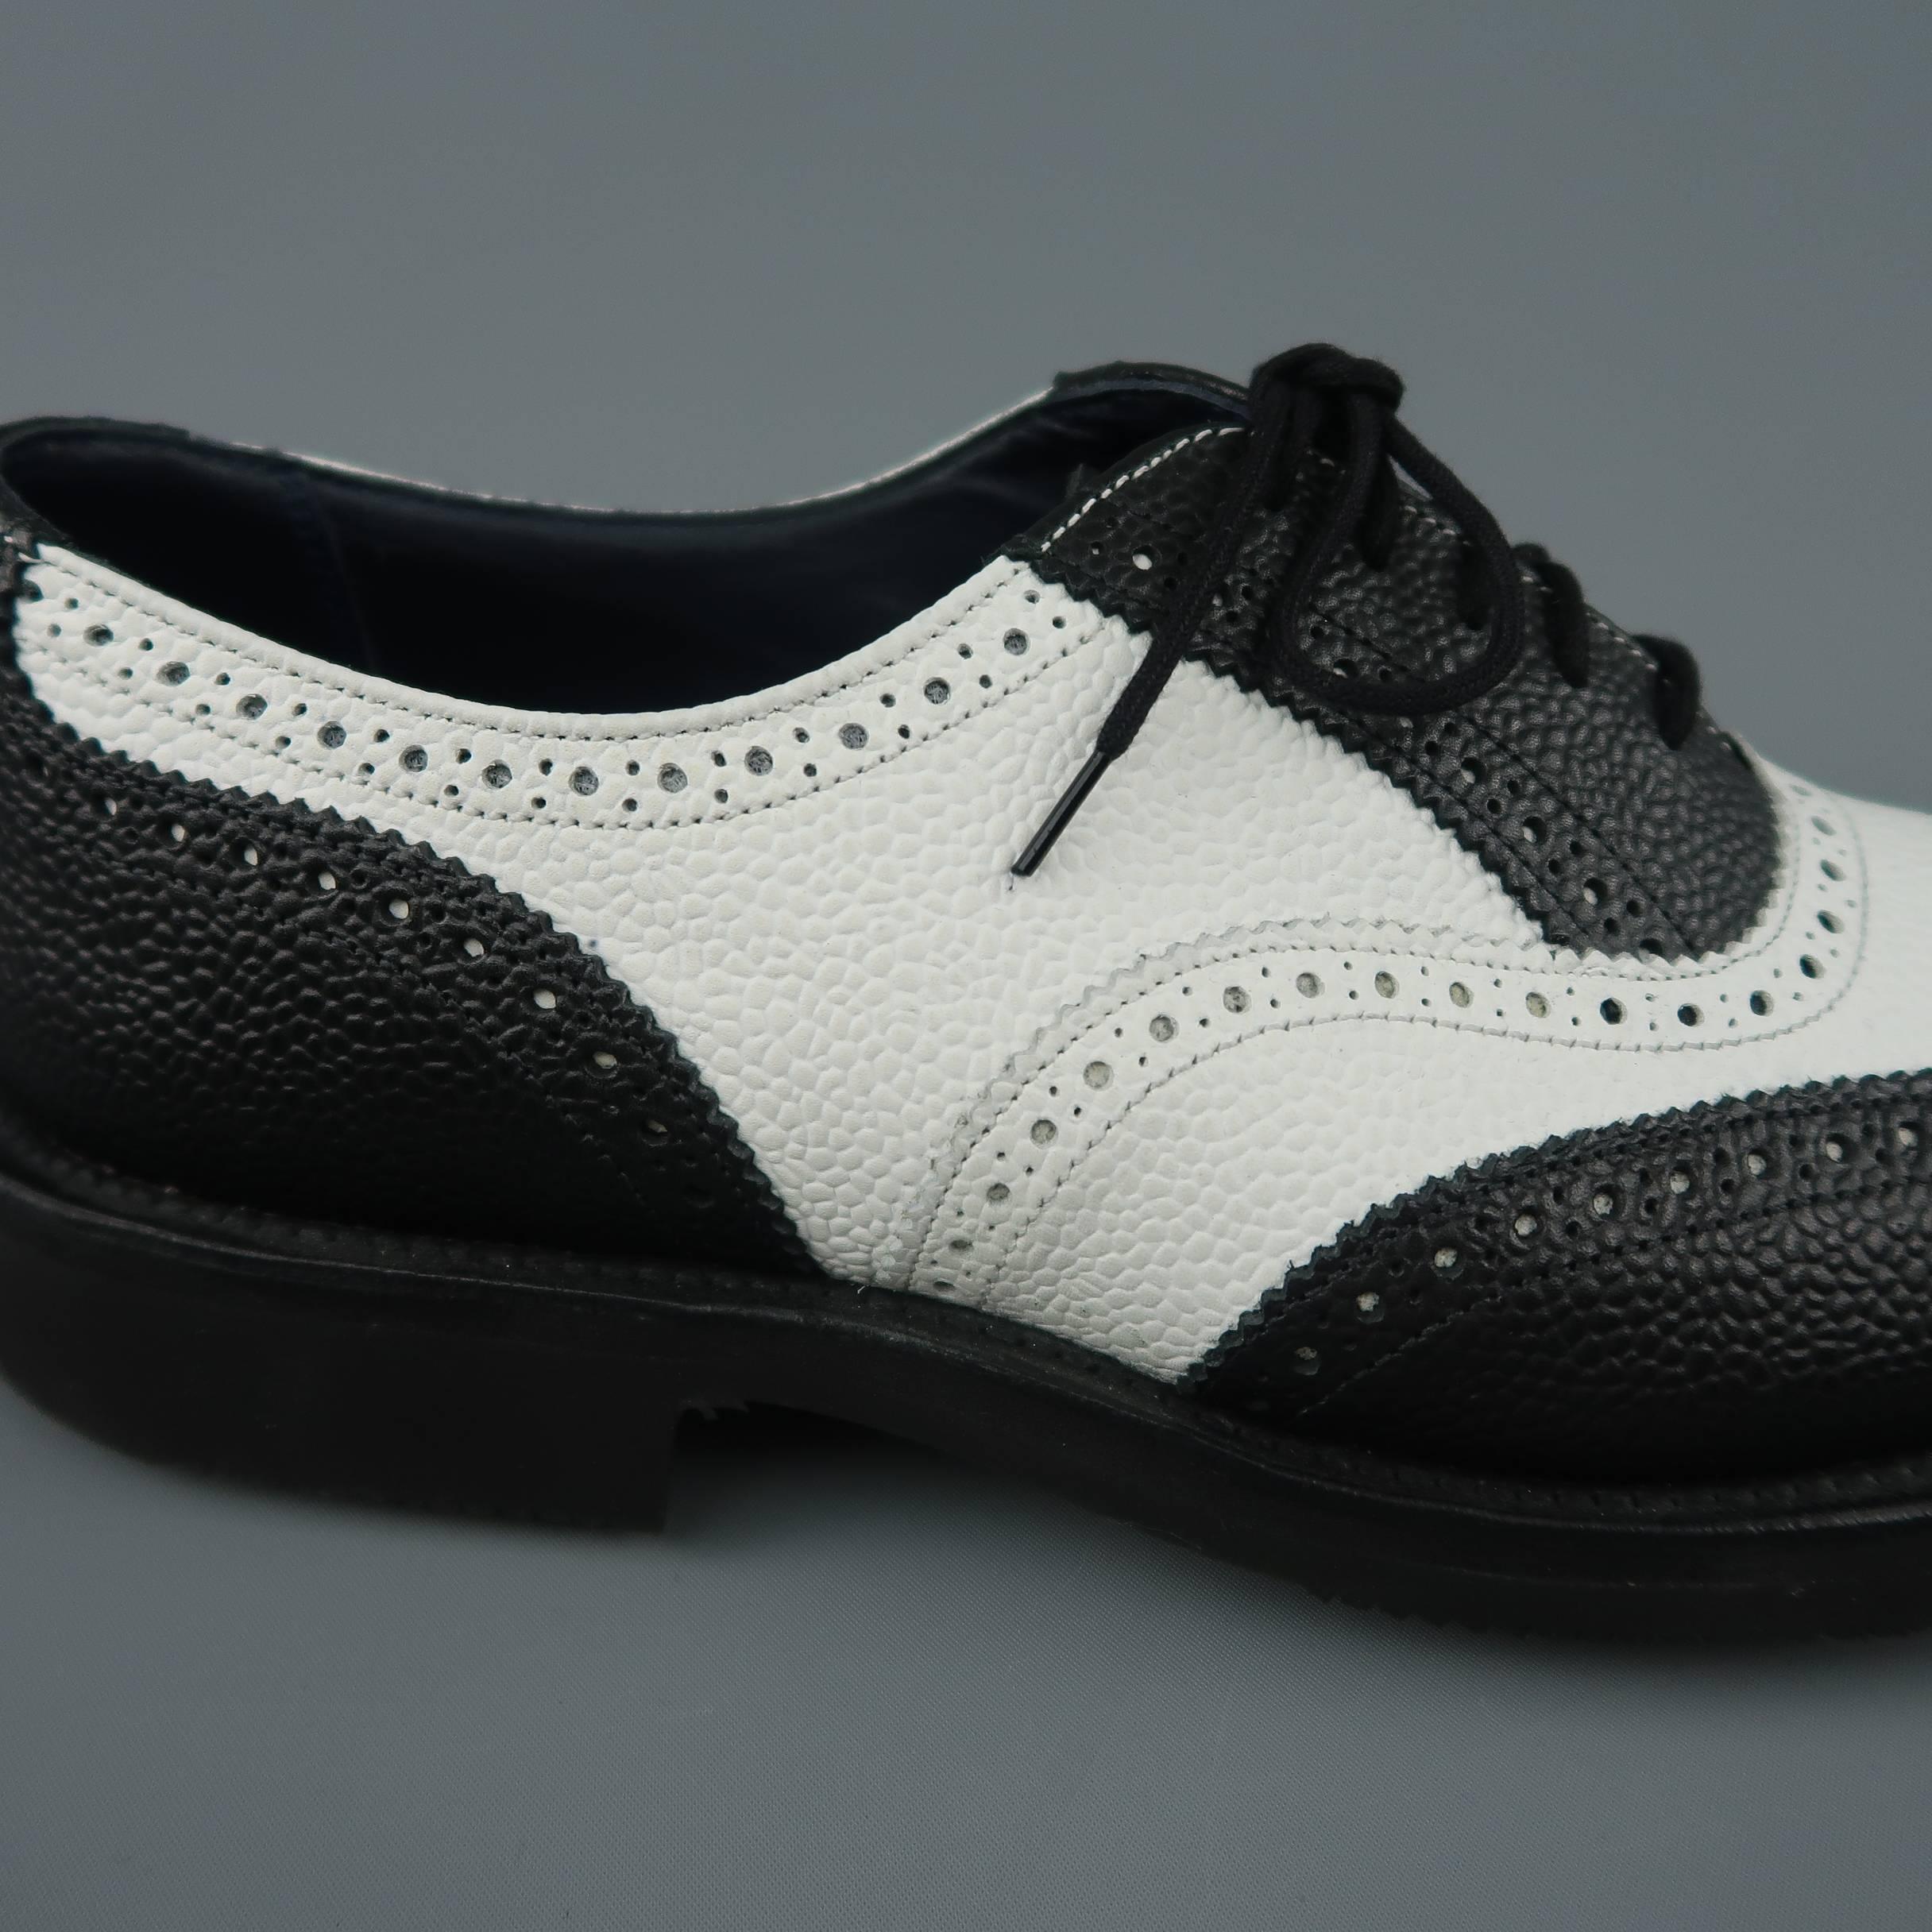 JUNYA WATANABE X TRICKER'S dress shoes come in black and white pebbled textured leather with a wing tip toe, perforated brogue details throughout, and light weight rubber sole. With box. Made in England.
 
New in Box.
Marked: UK 9
 
Outsole: 12.25 x